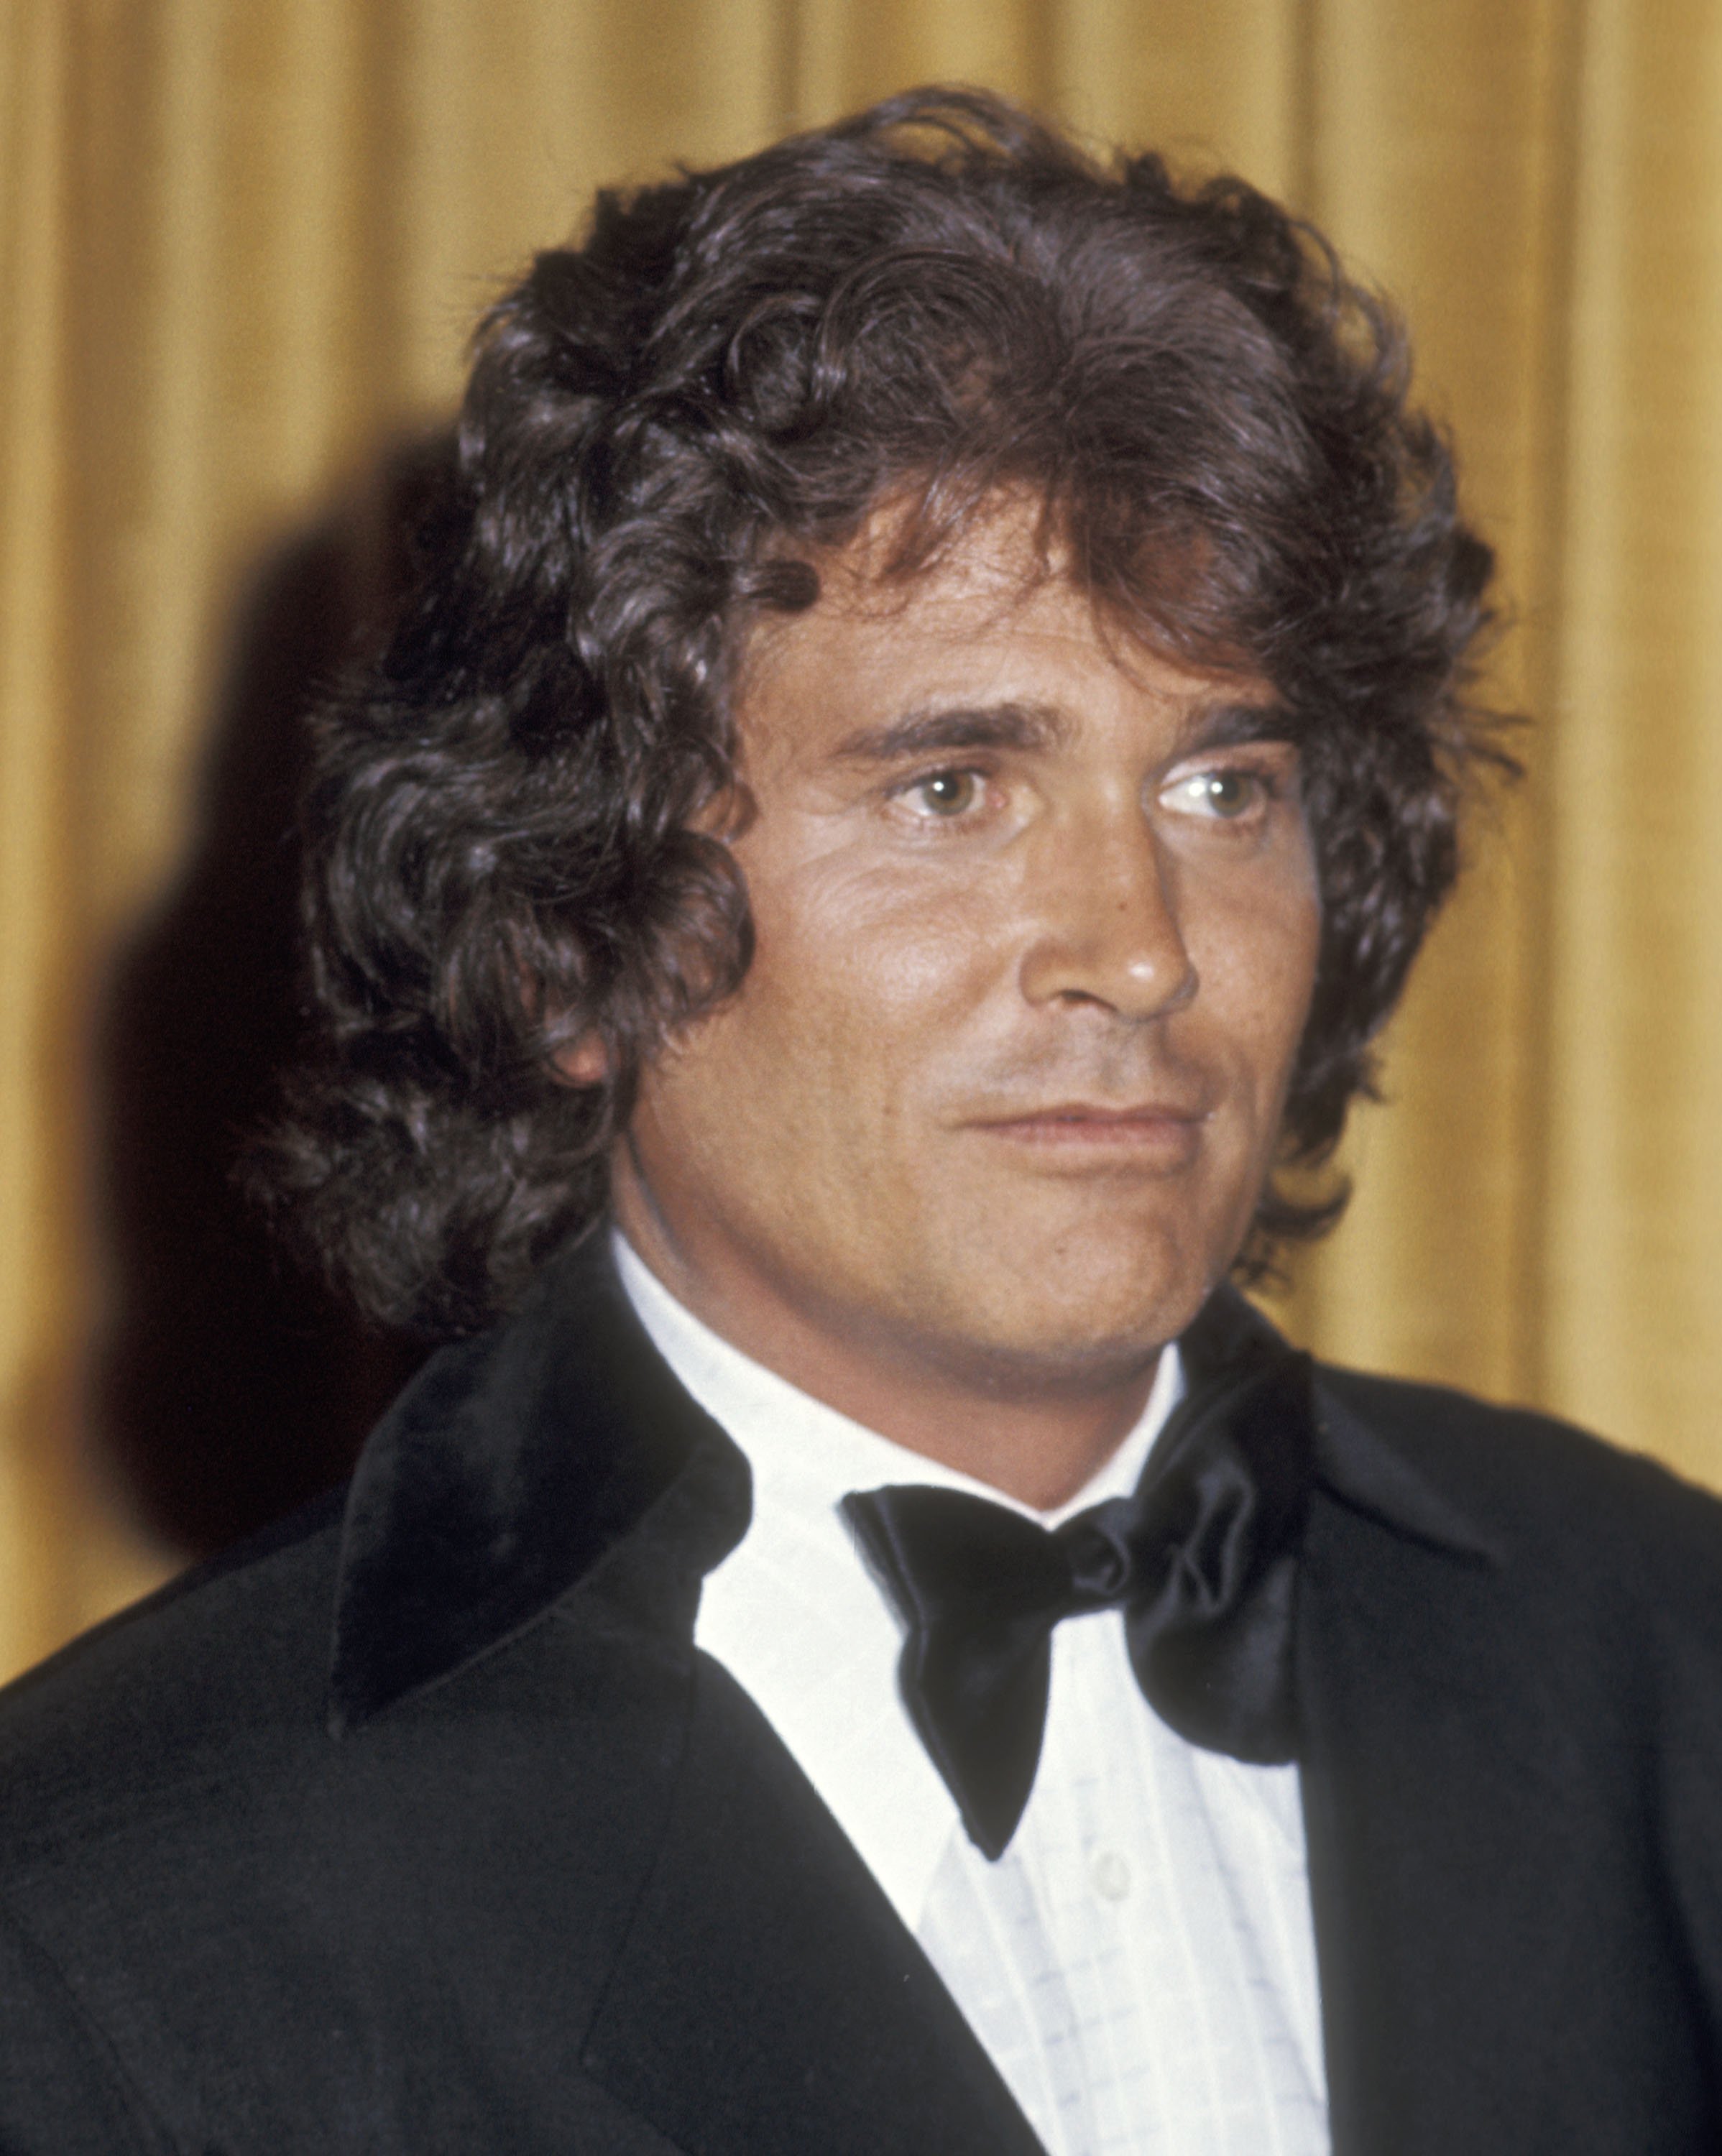 Michael Landon attends the Hollywood Radio and Television Society's 16th Annual International Broadcasting Awards on March 4, 1976, at Century Plaza Hotel in Los Angeles, California. | Source: Getty Images